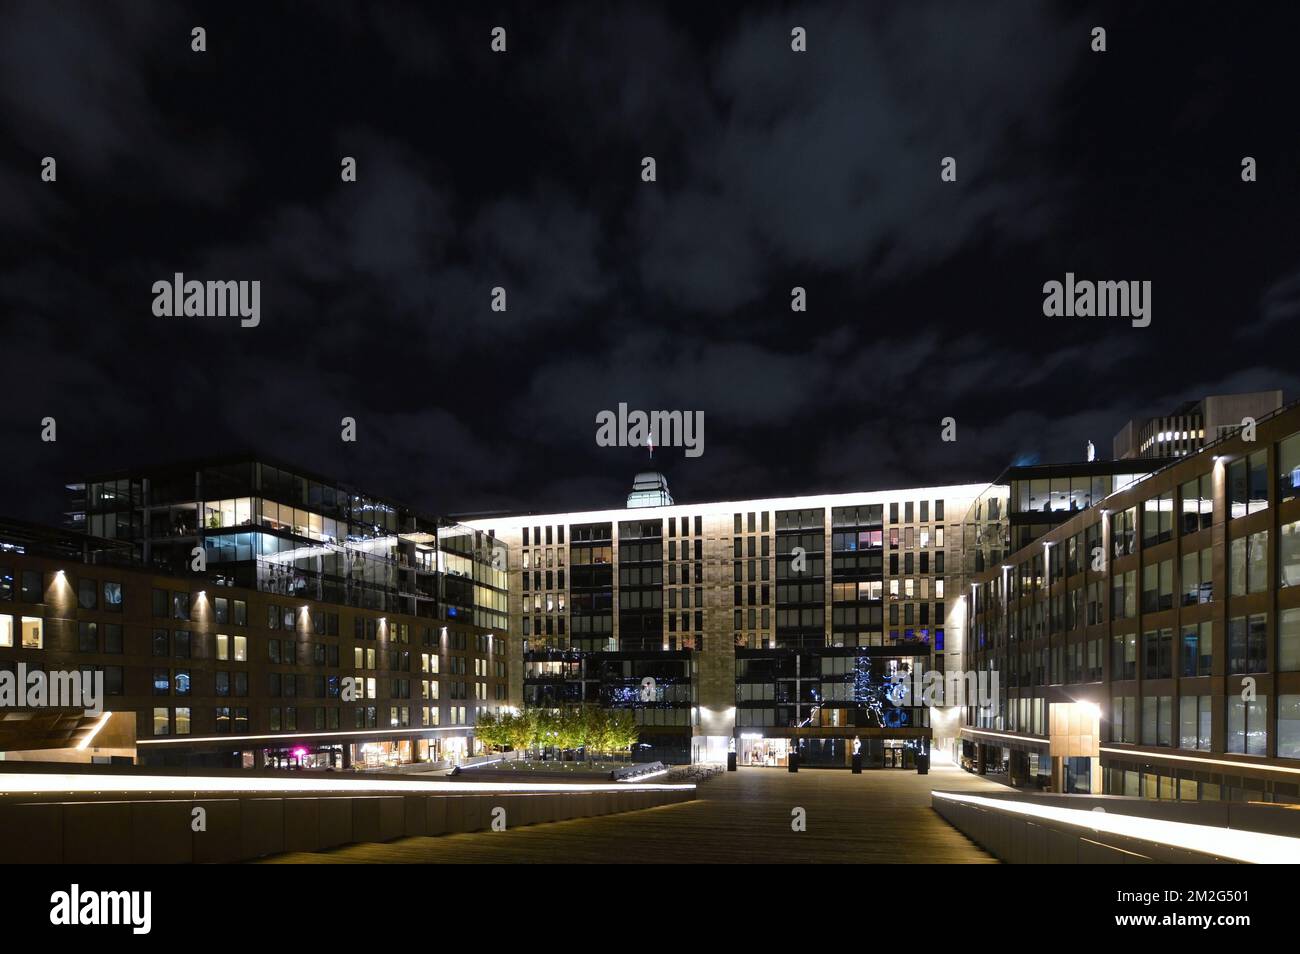 Queen's Marque waterfront development in downtown Halifax, Nova Scotia, Canada at night. Stock Photo